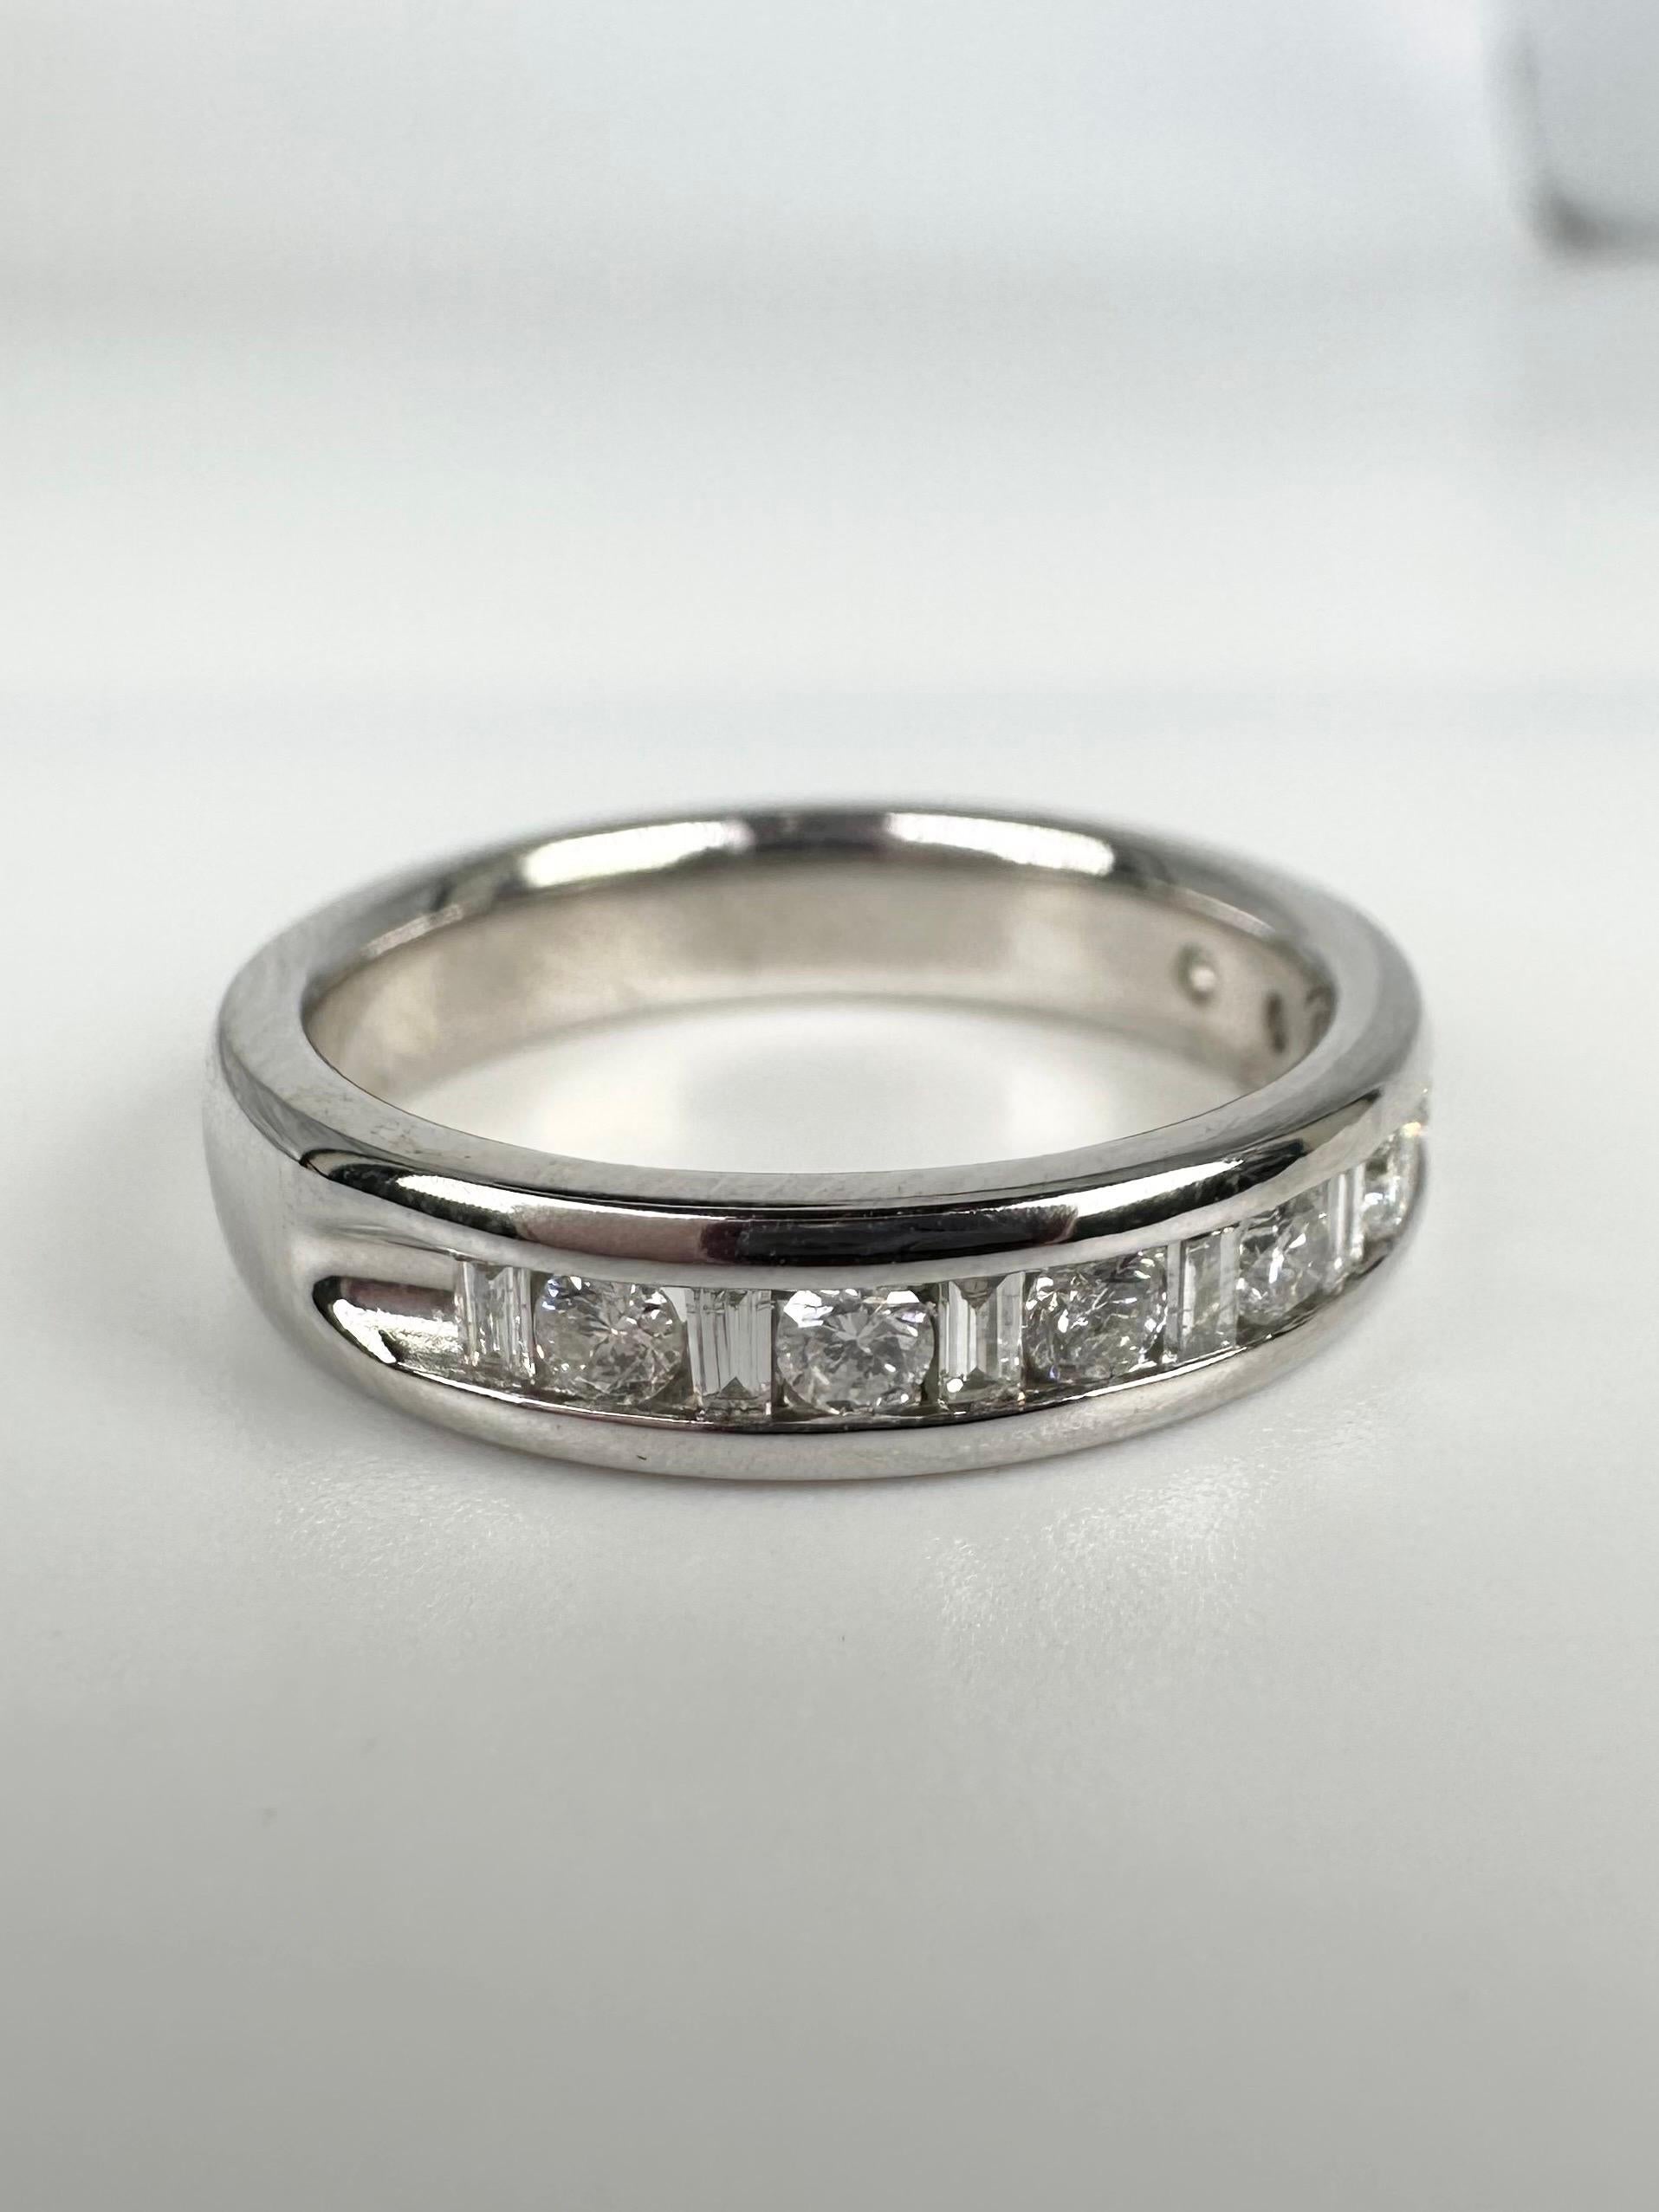 Simple wedding band with round brilliants and baguettes in channel setting made in 14KT white gold.

GOLD: 14KT gold
NATURAL DIAMOND(S)
Clarity/Color: VS-SI/G
Carat:0.46ct
Cut:Baguette, Round Brilliant
Grams:5.11
size: 6
Item#: 110-00031AKO

WHAT